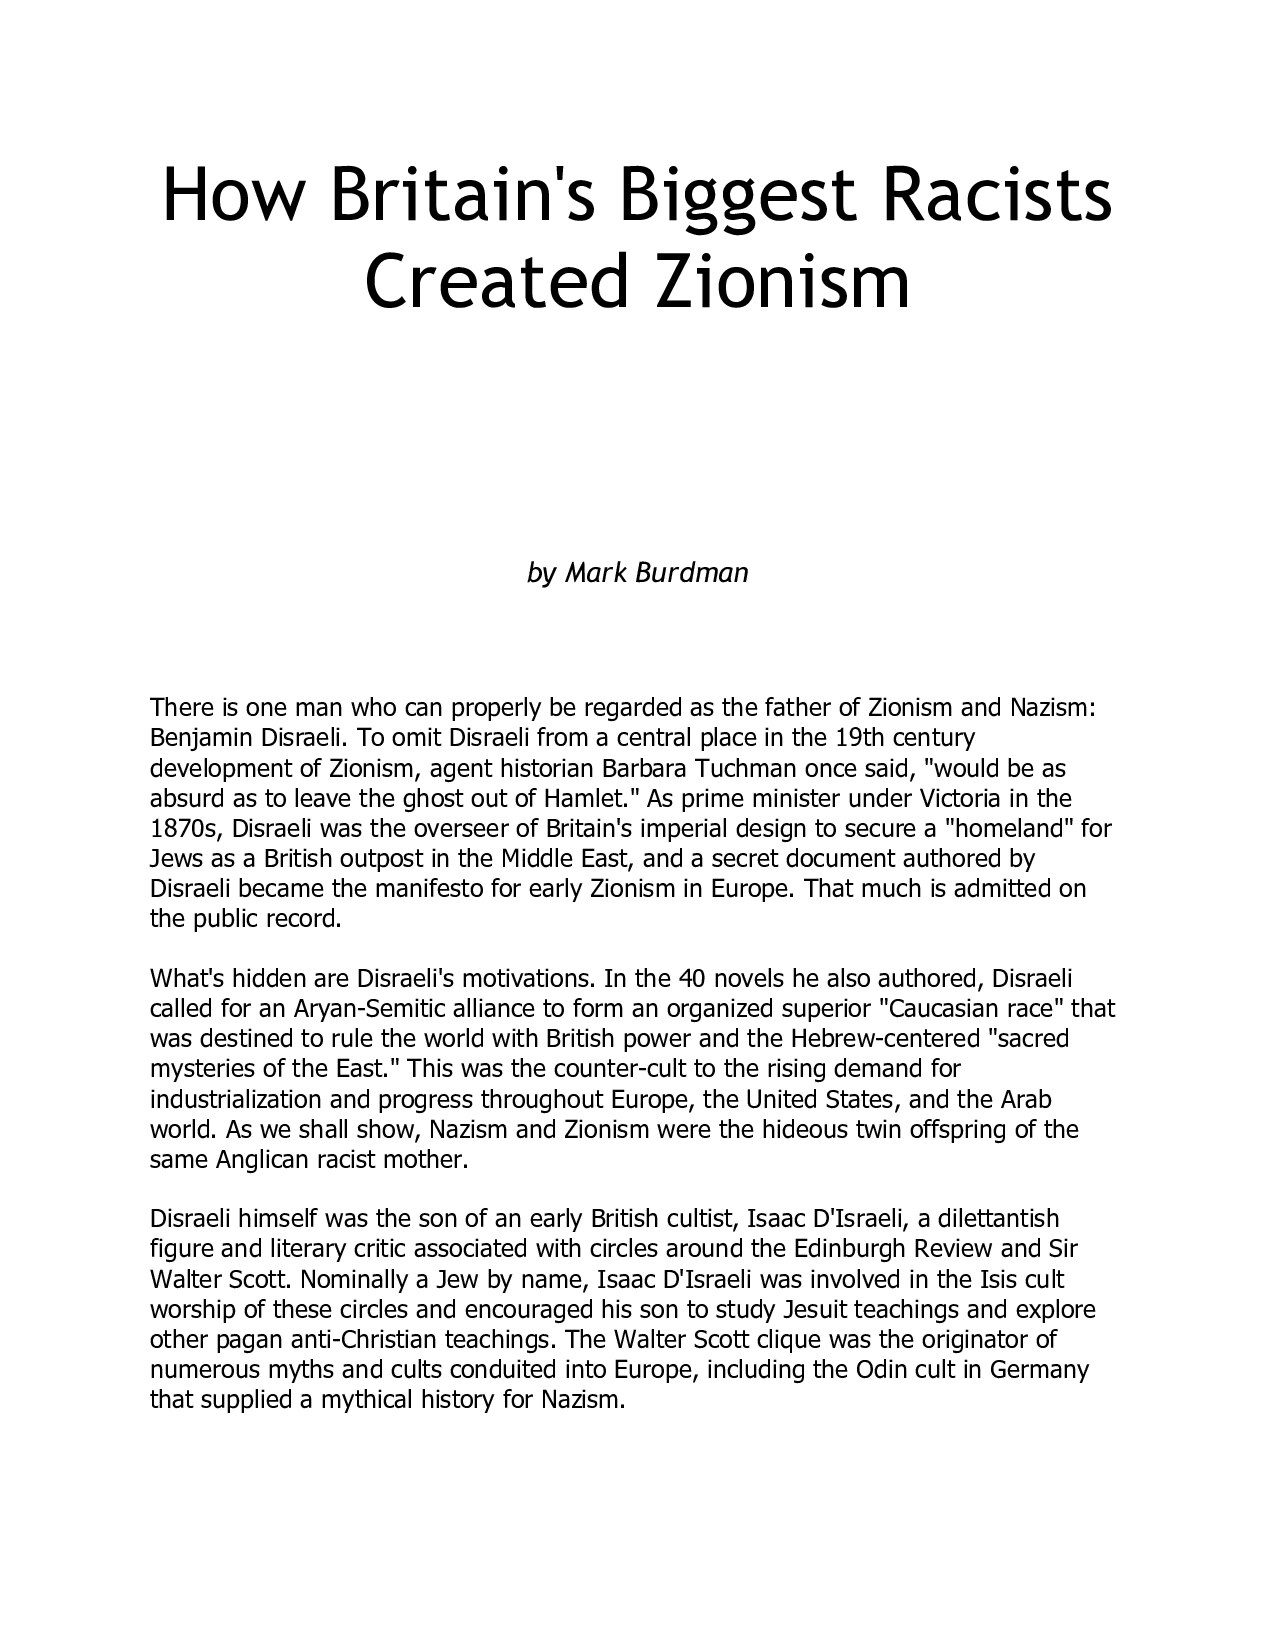 Microsoft Word - How Britains Biggest Racist Created Zionism.doc